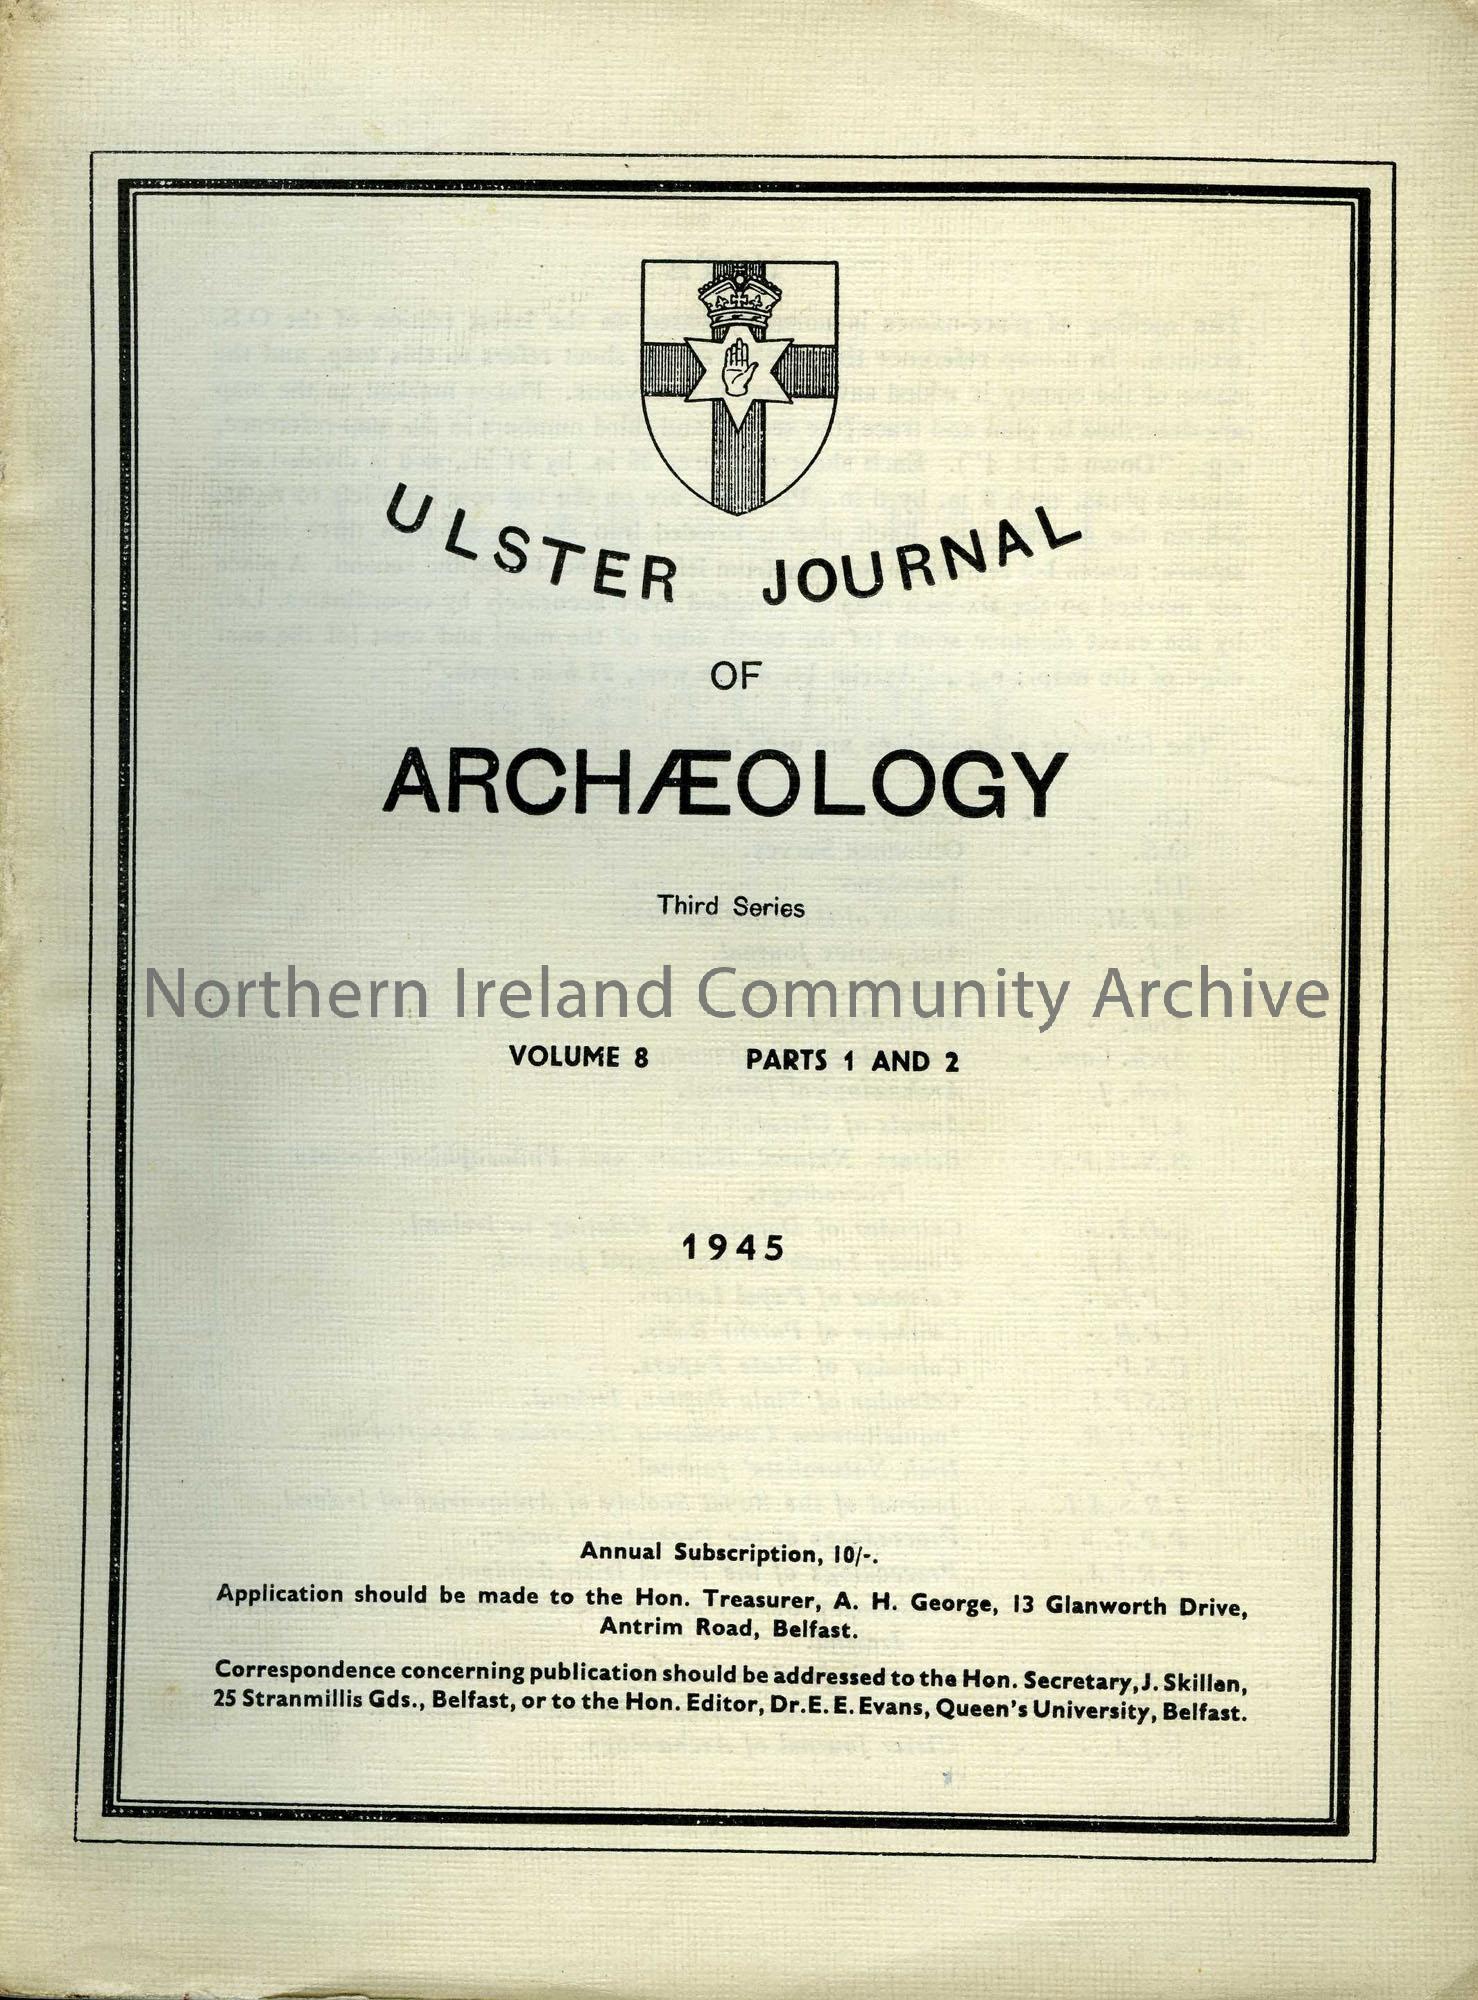 book titled, Ulster Journal of Archaeology. Third Series. Volume 8, parts 1 and 2. 1945 (5592)